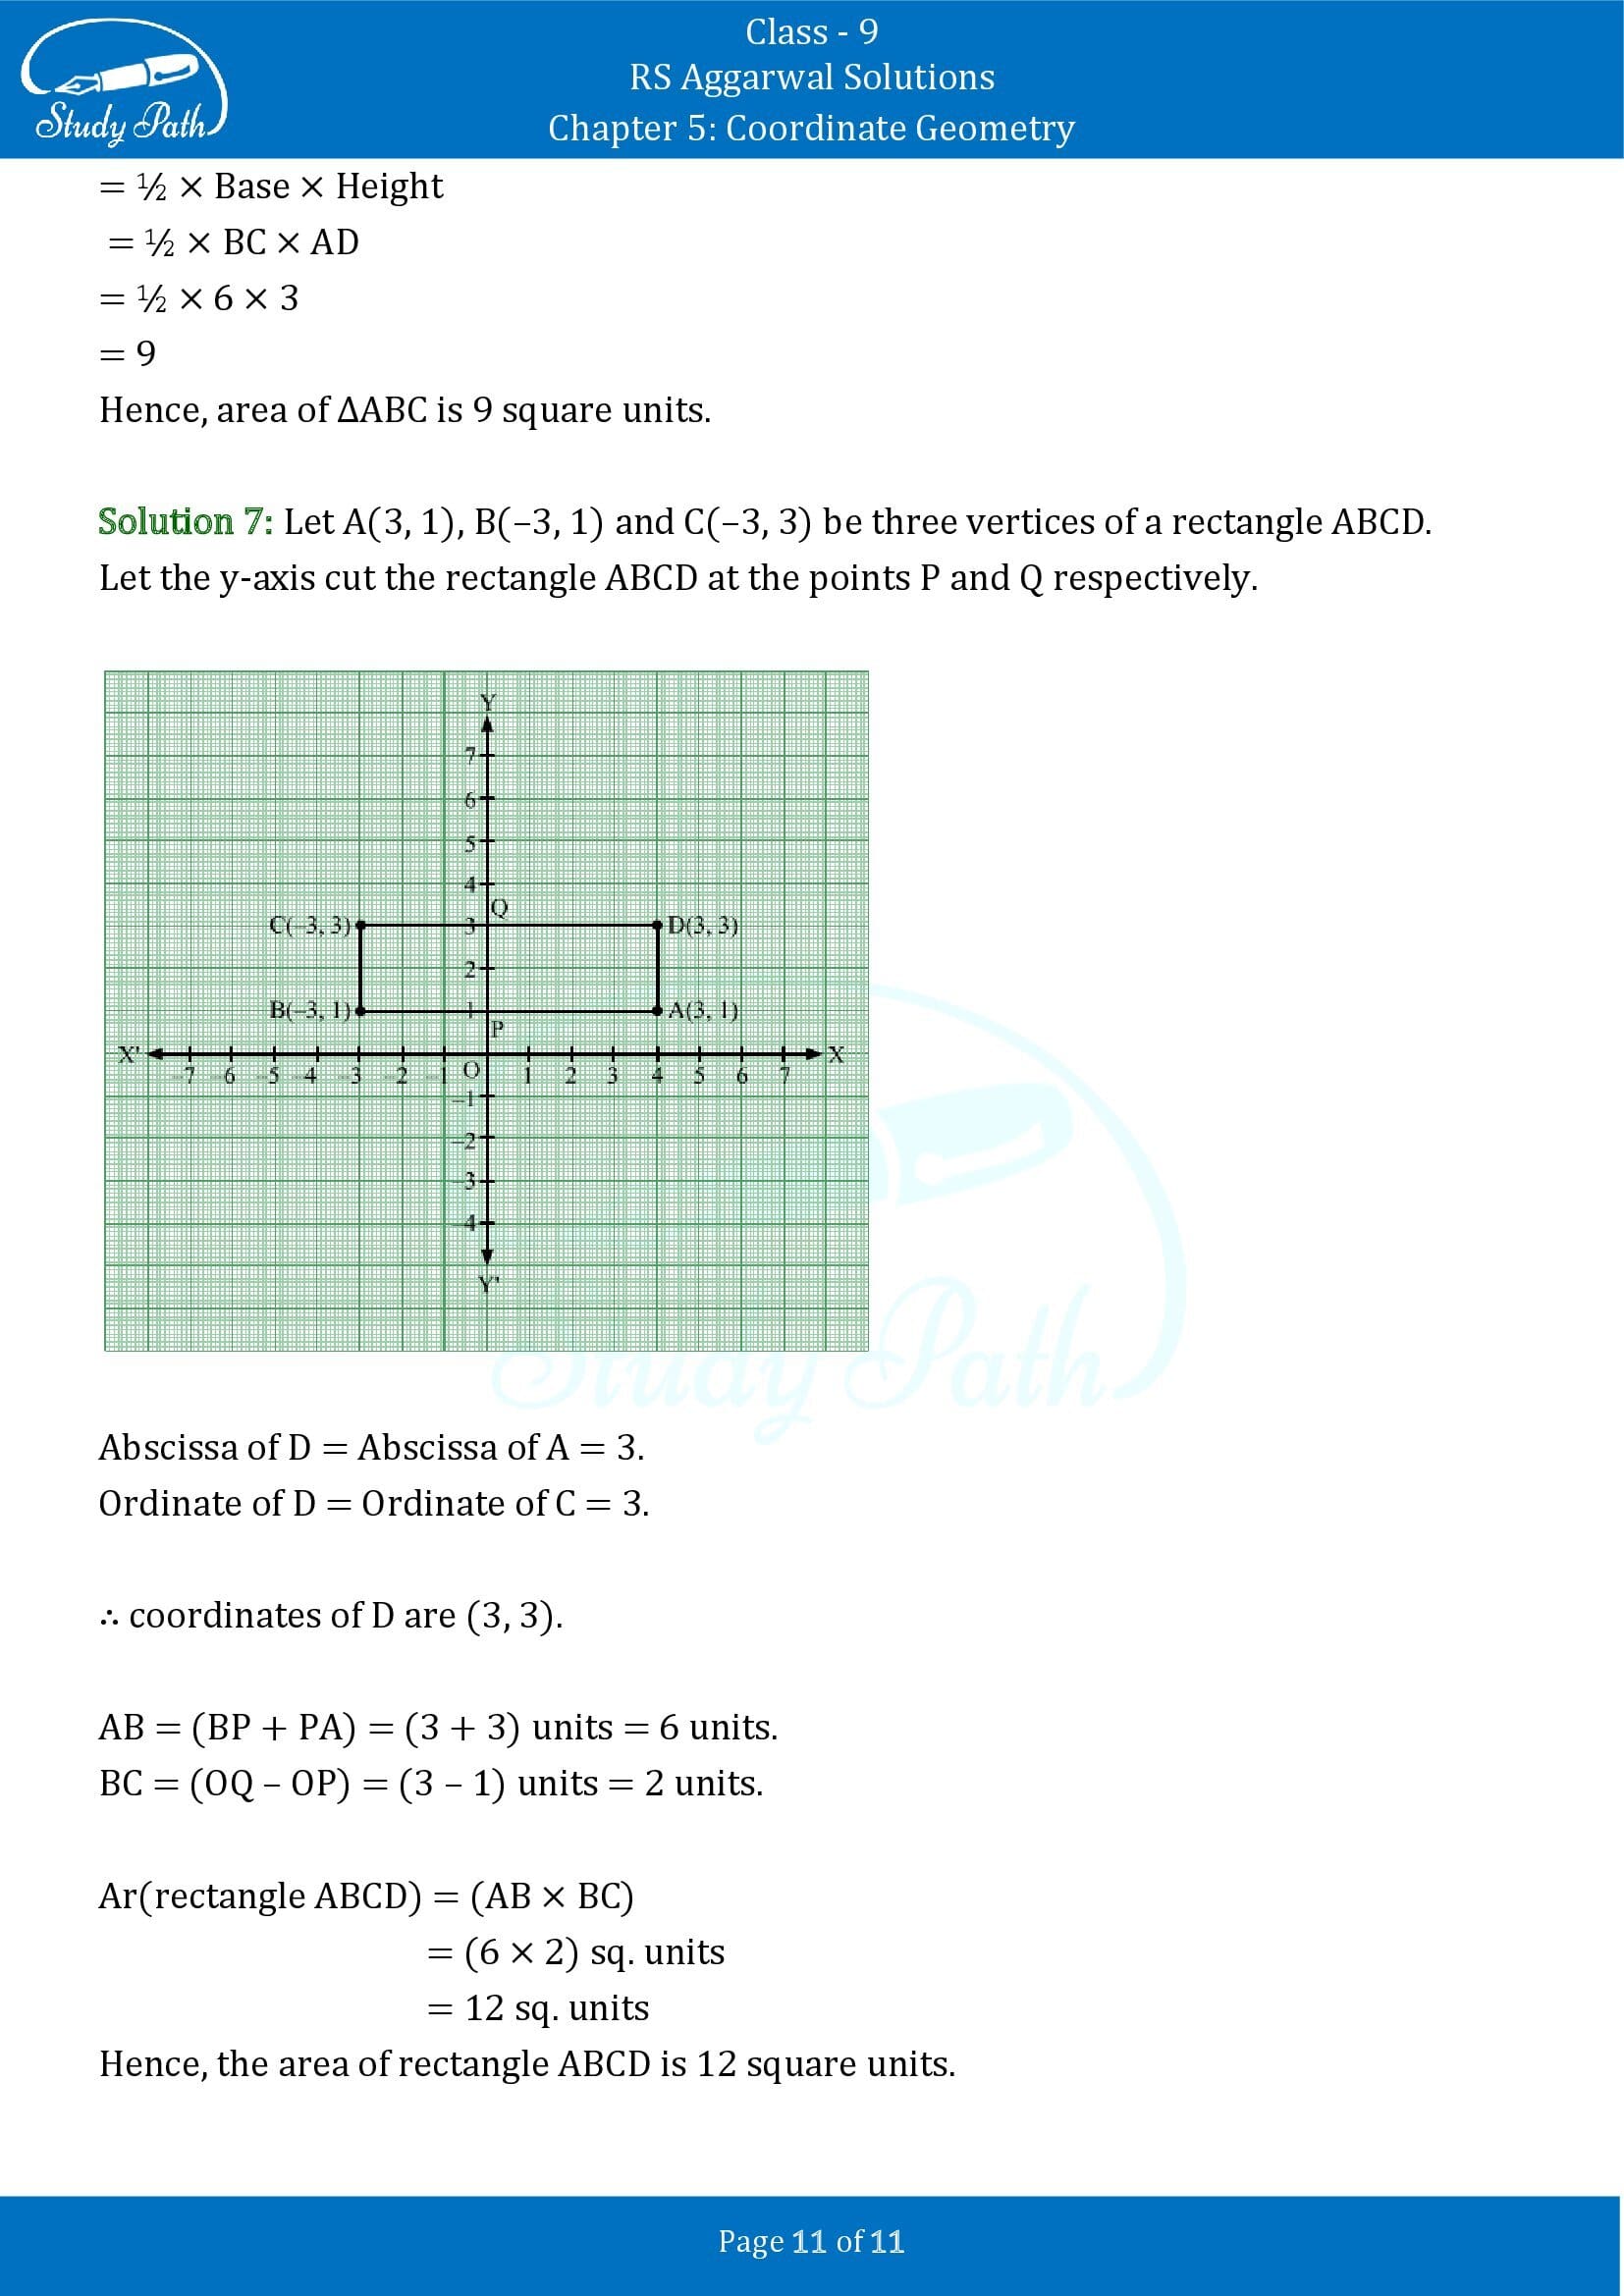 RS Aggarwal Solutions Class 9 Chapter 5 Coordinate Geometry Exercise 5 00011